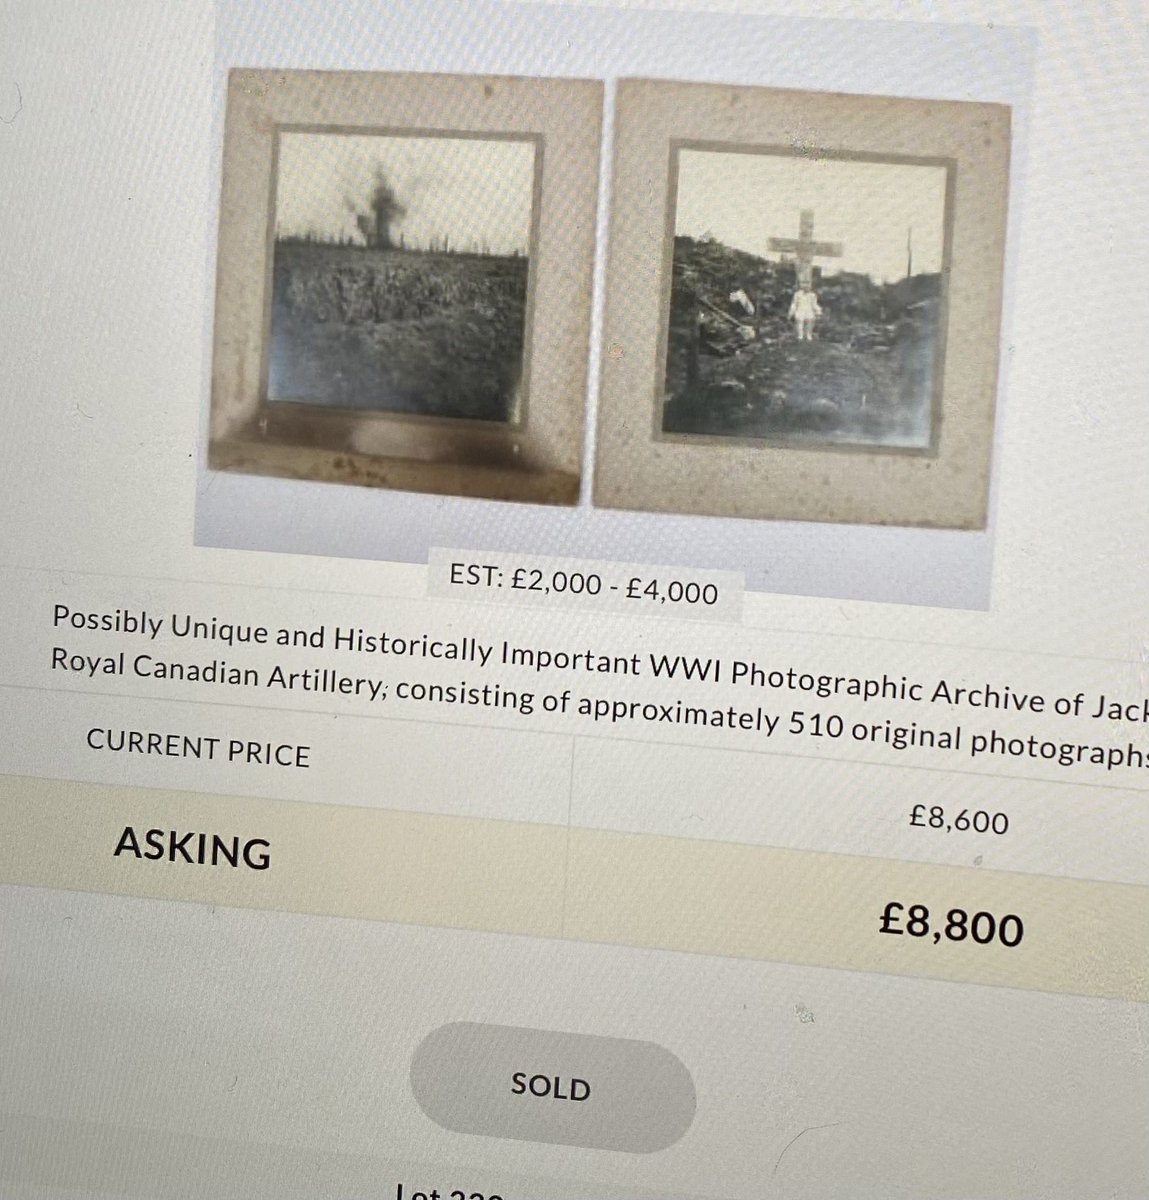 I was going to bid on this collection of some 500 soldier’s own photographs today. Imagined I might have to bid £1800 at least. Not even close! Some great #ww1 images but enough there for 11k when fees are included? Bonkers. #somme #ypres #Greatwar